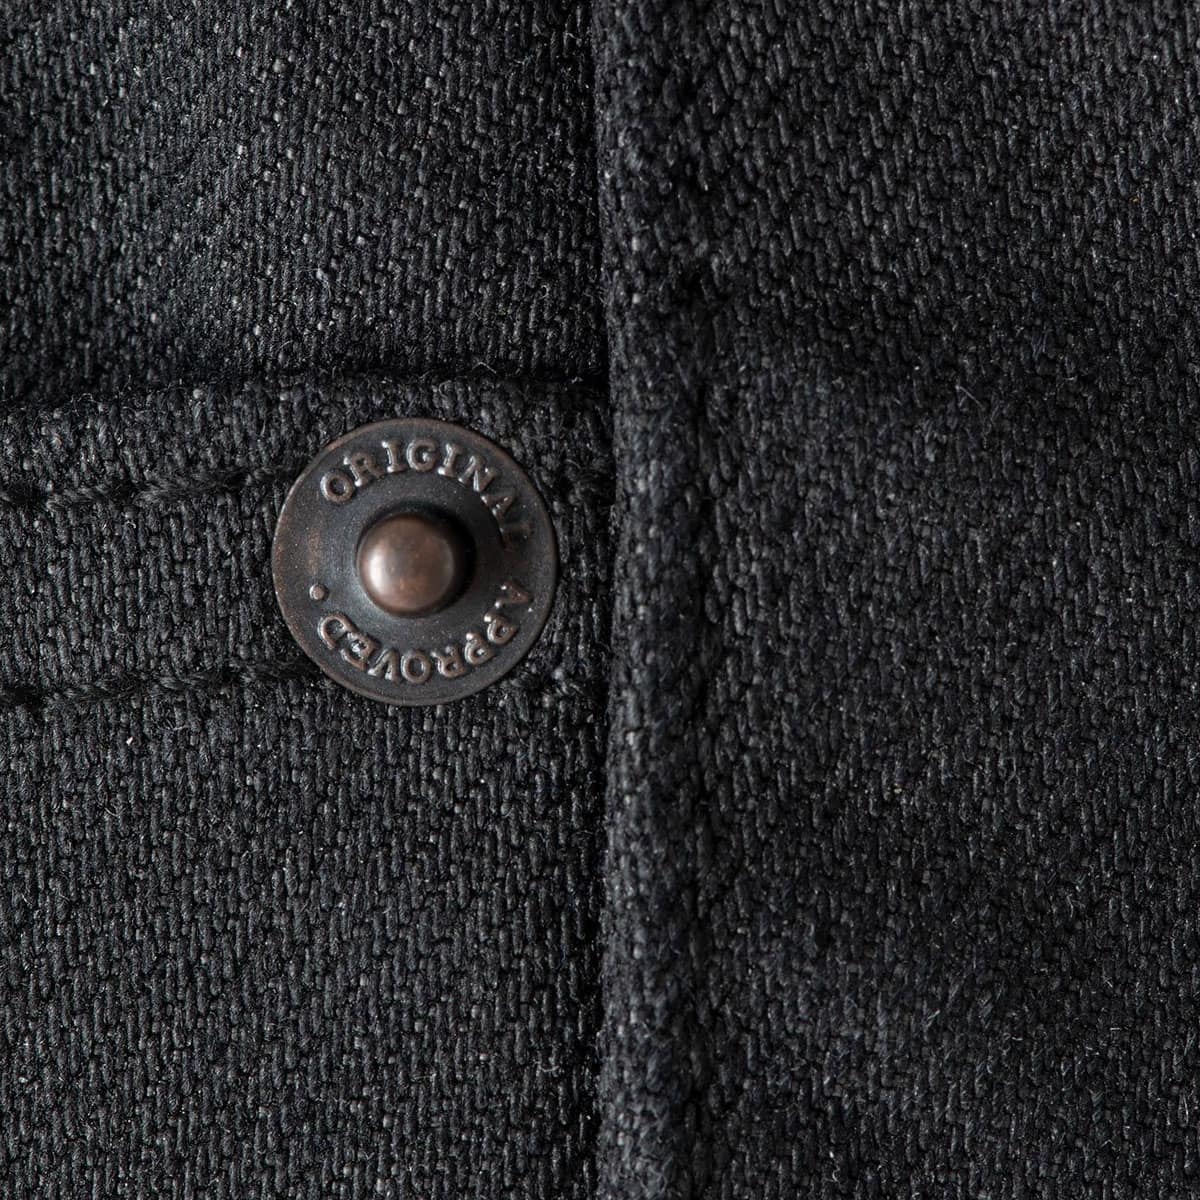 Oxford AAA Original Jeans in a straight fit: CE AAA rated single-layer motorcycle jeans - rivet